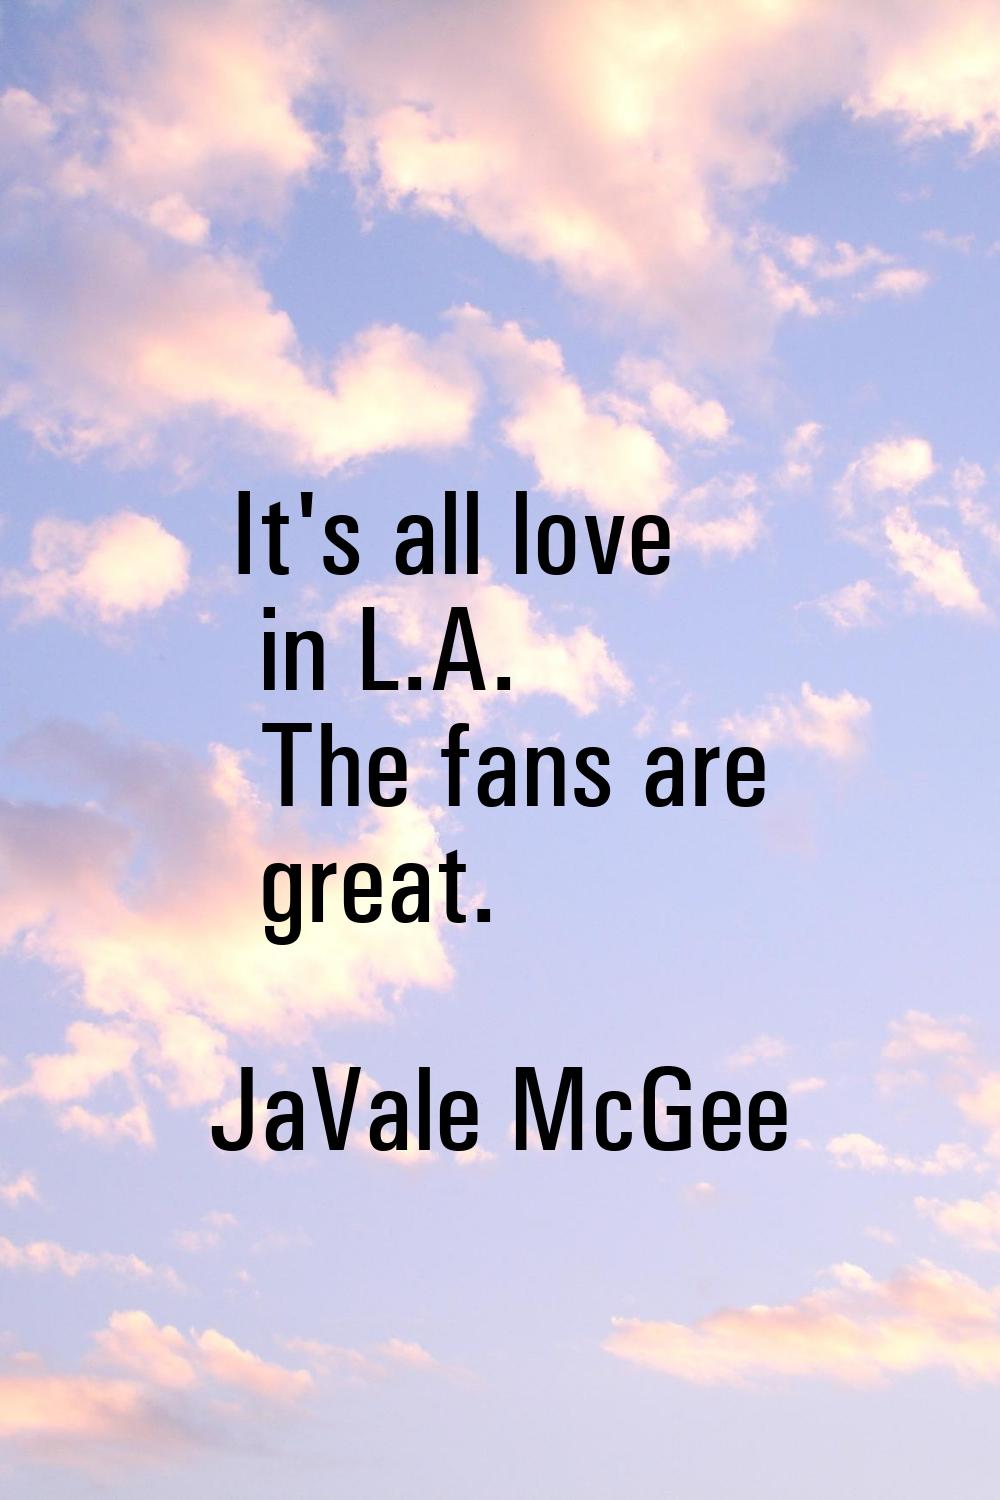 It's all love in L.A. The fans are great.